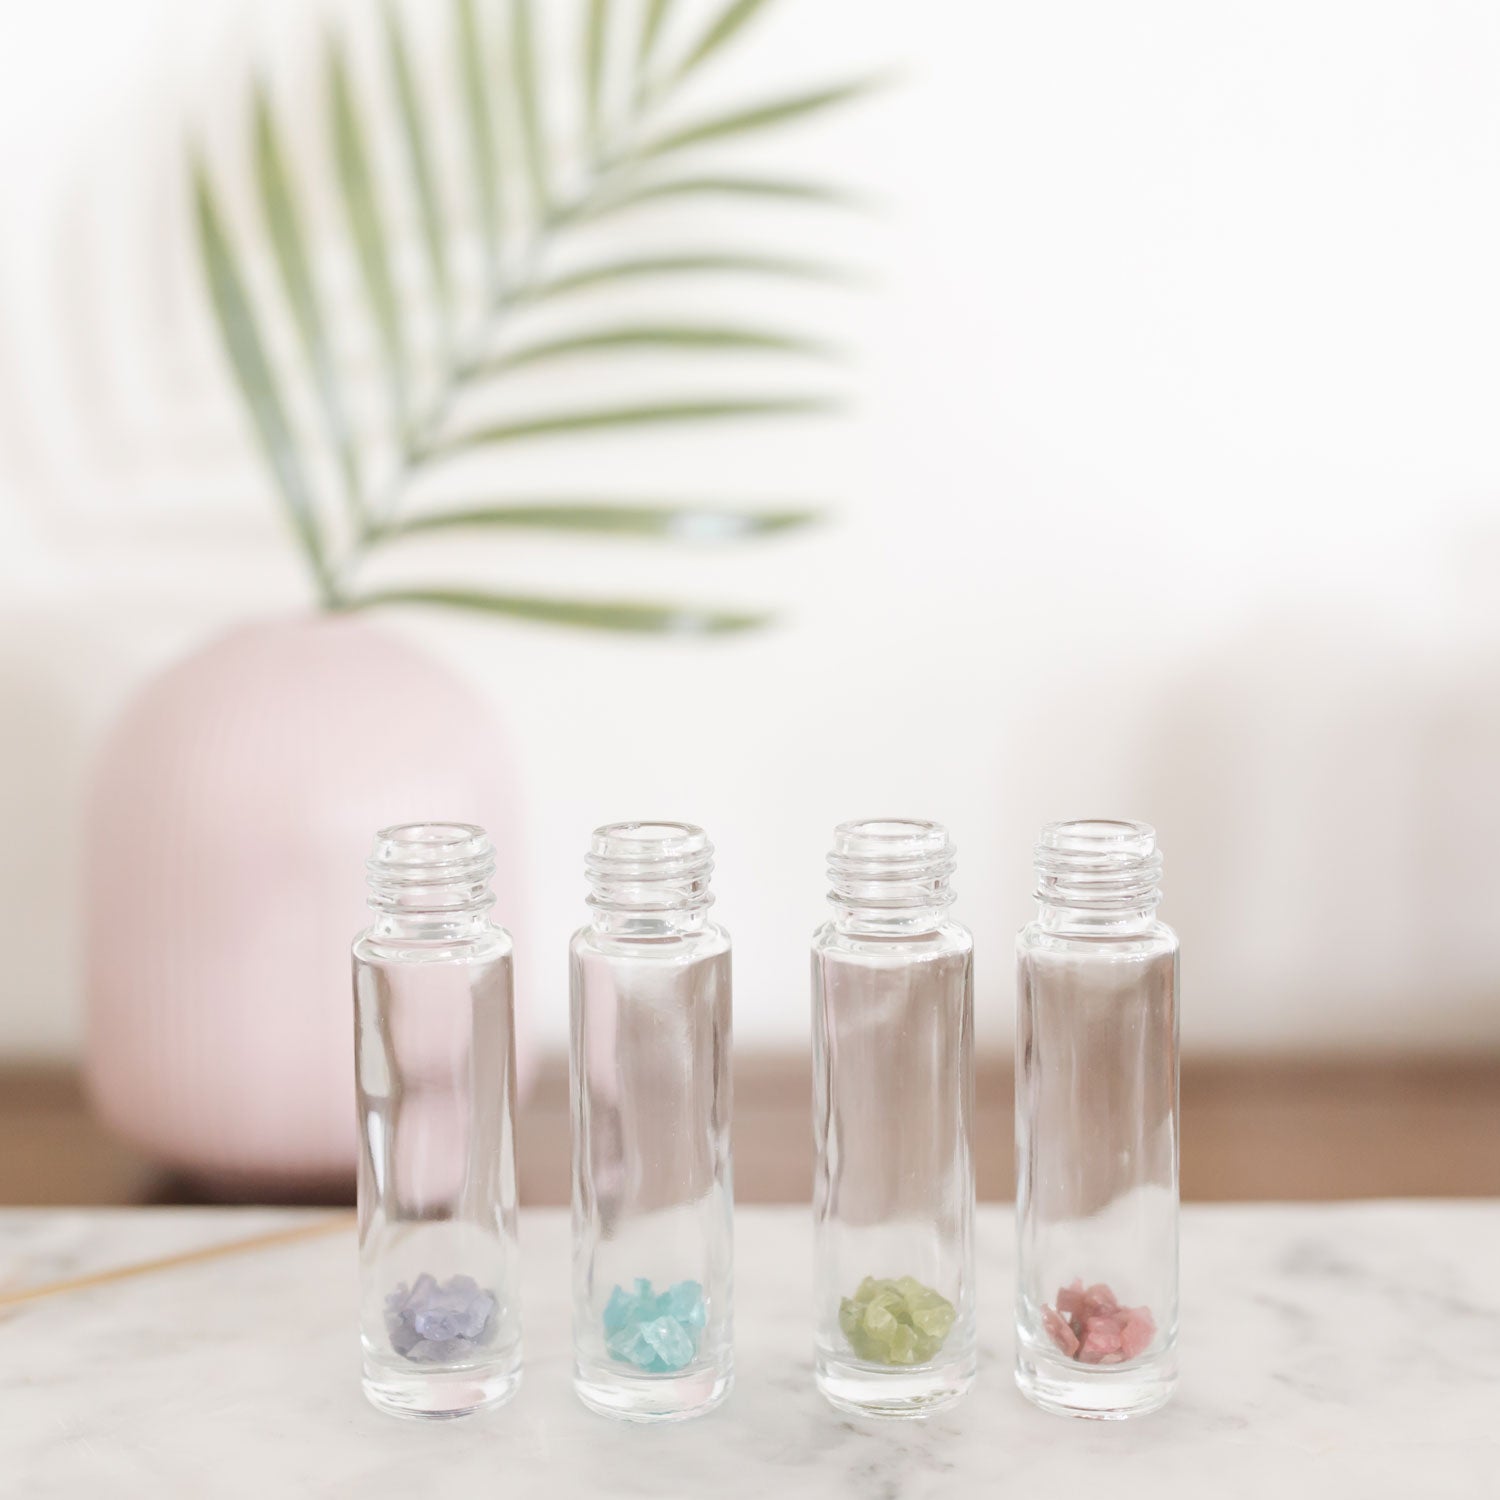 DIY Essential Oil Rollerballs with Crystals by Dani Barbe